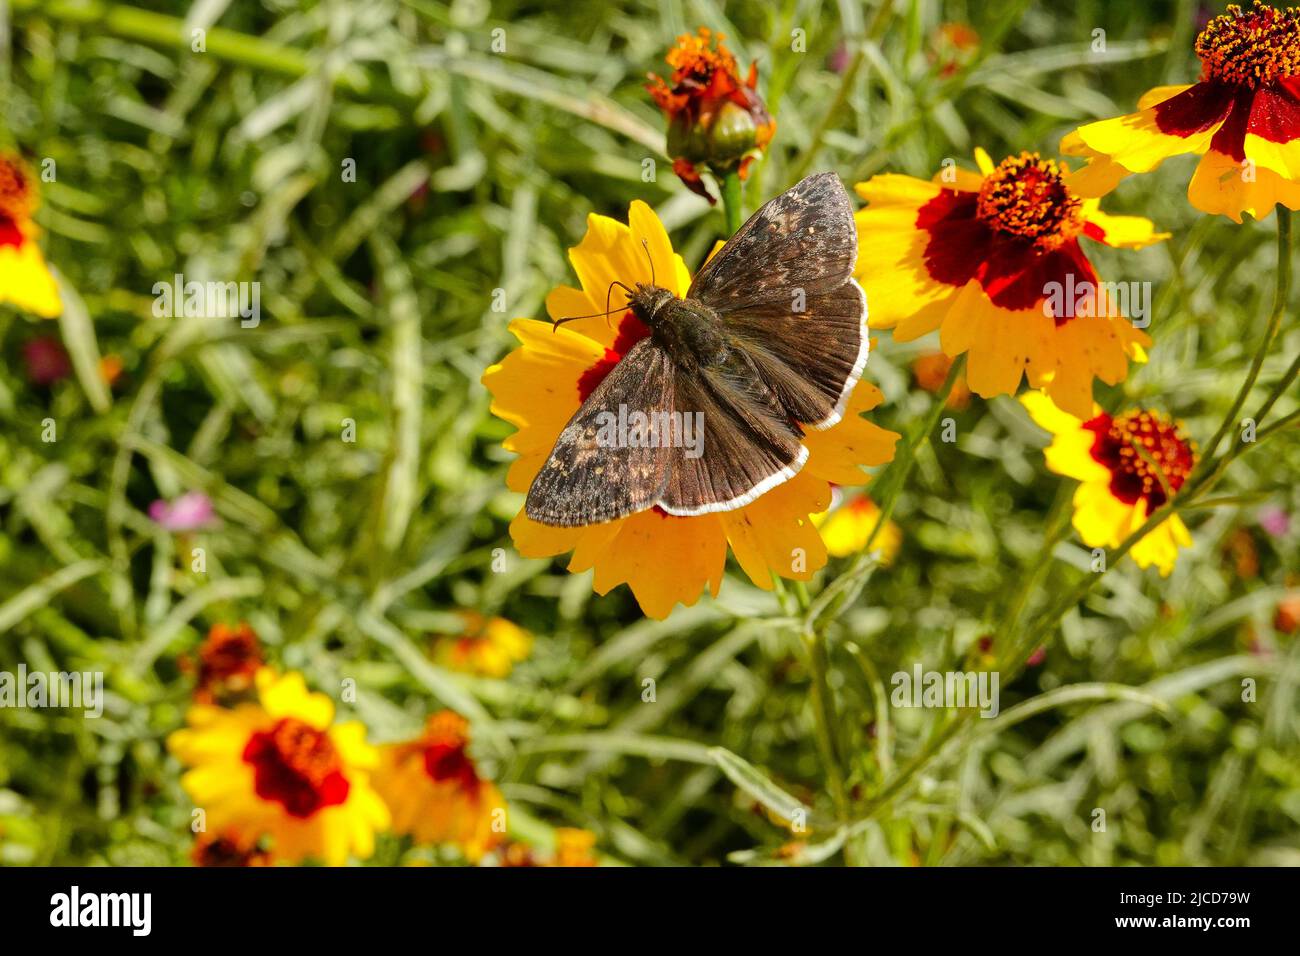 Funereal Duskywing butterfly ( Erynnis funeralis ) on Coreopsis basalis Golden Wave Coreopsis a red and yellow wildflower growing in California garden Stock Photo